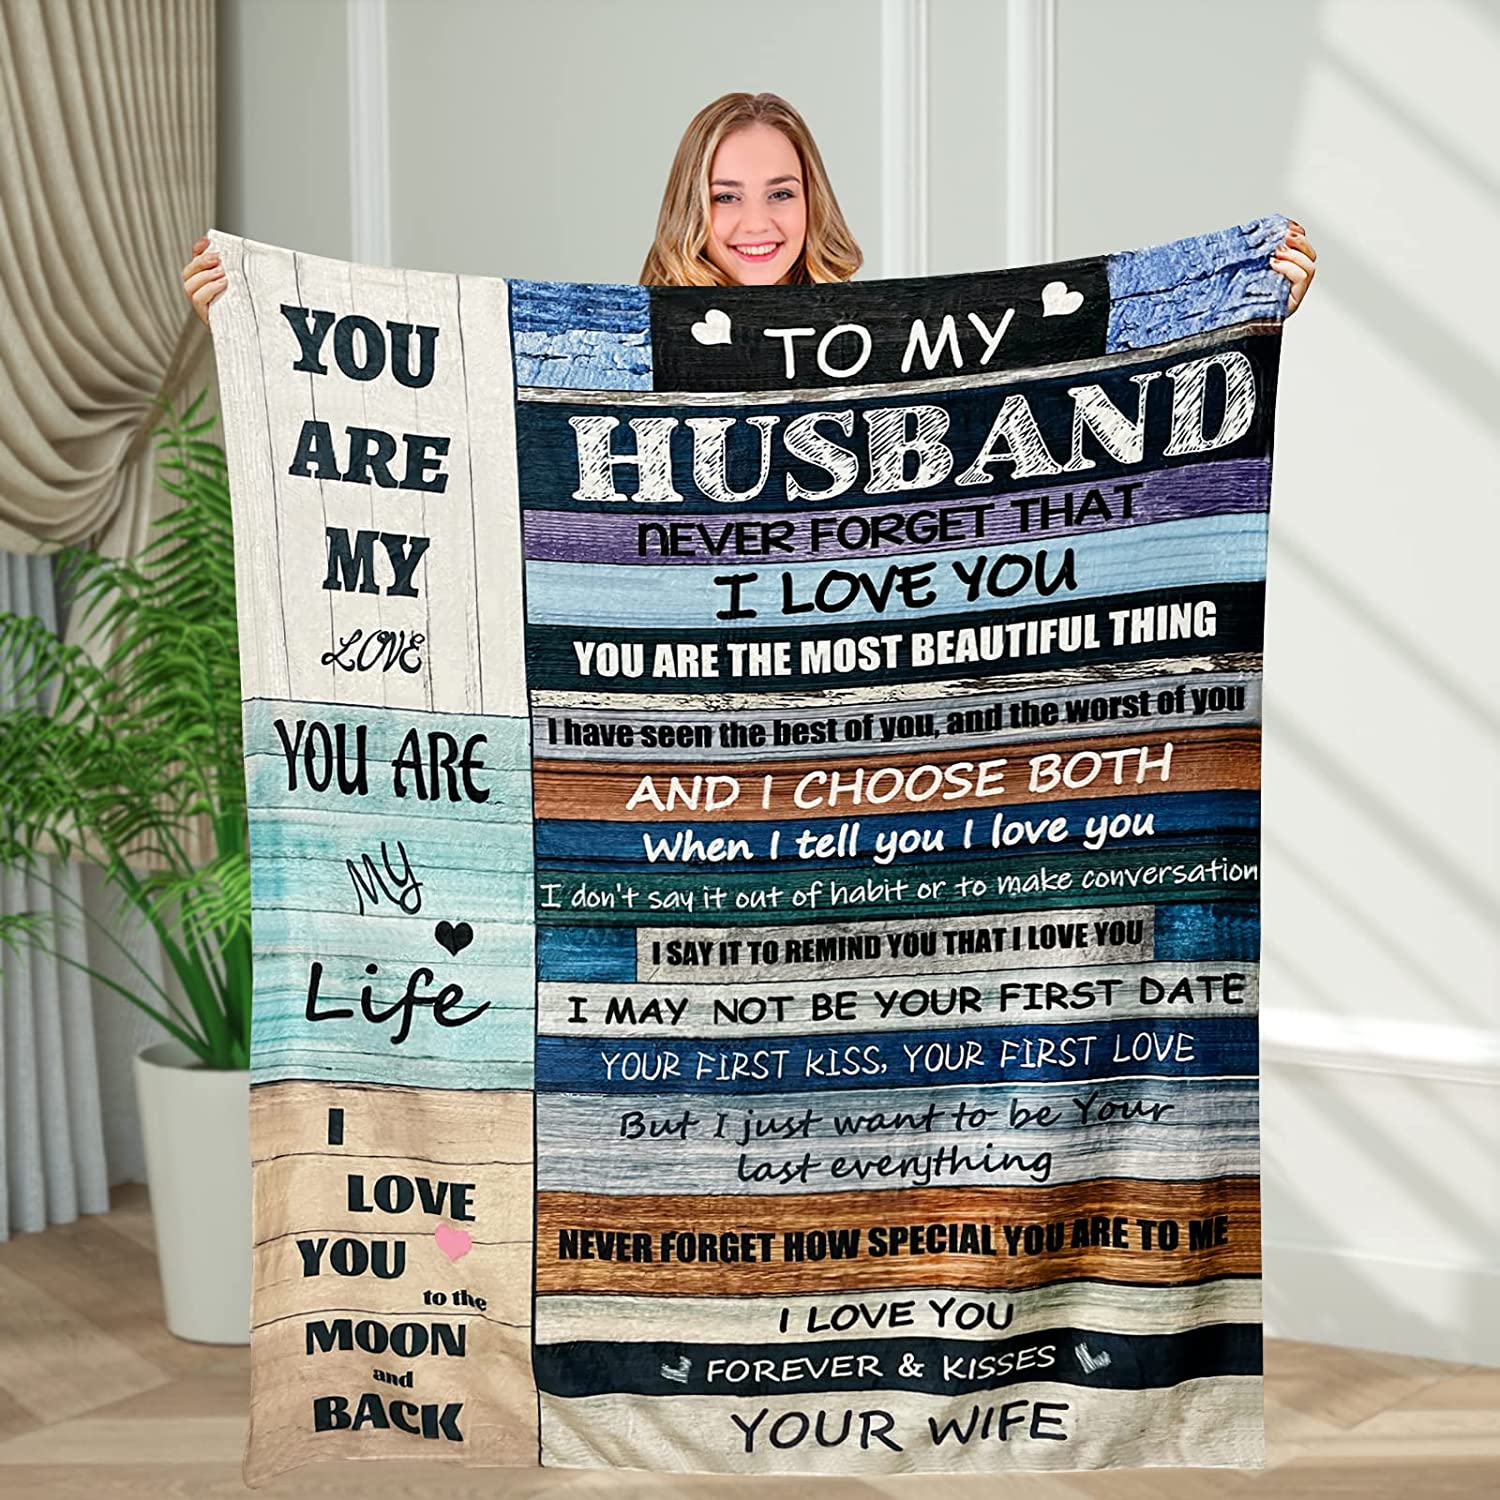 Gifts For Husband Blanket - You Are My Love, To My Husband Blanket - Gift From Wife Romantic Anniversary, Valentines, Fathers Day, Christmas, Birthday Blanket